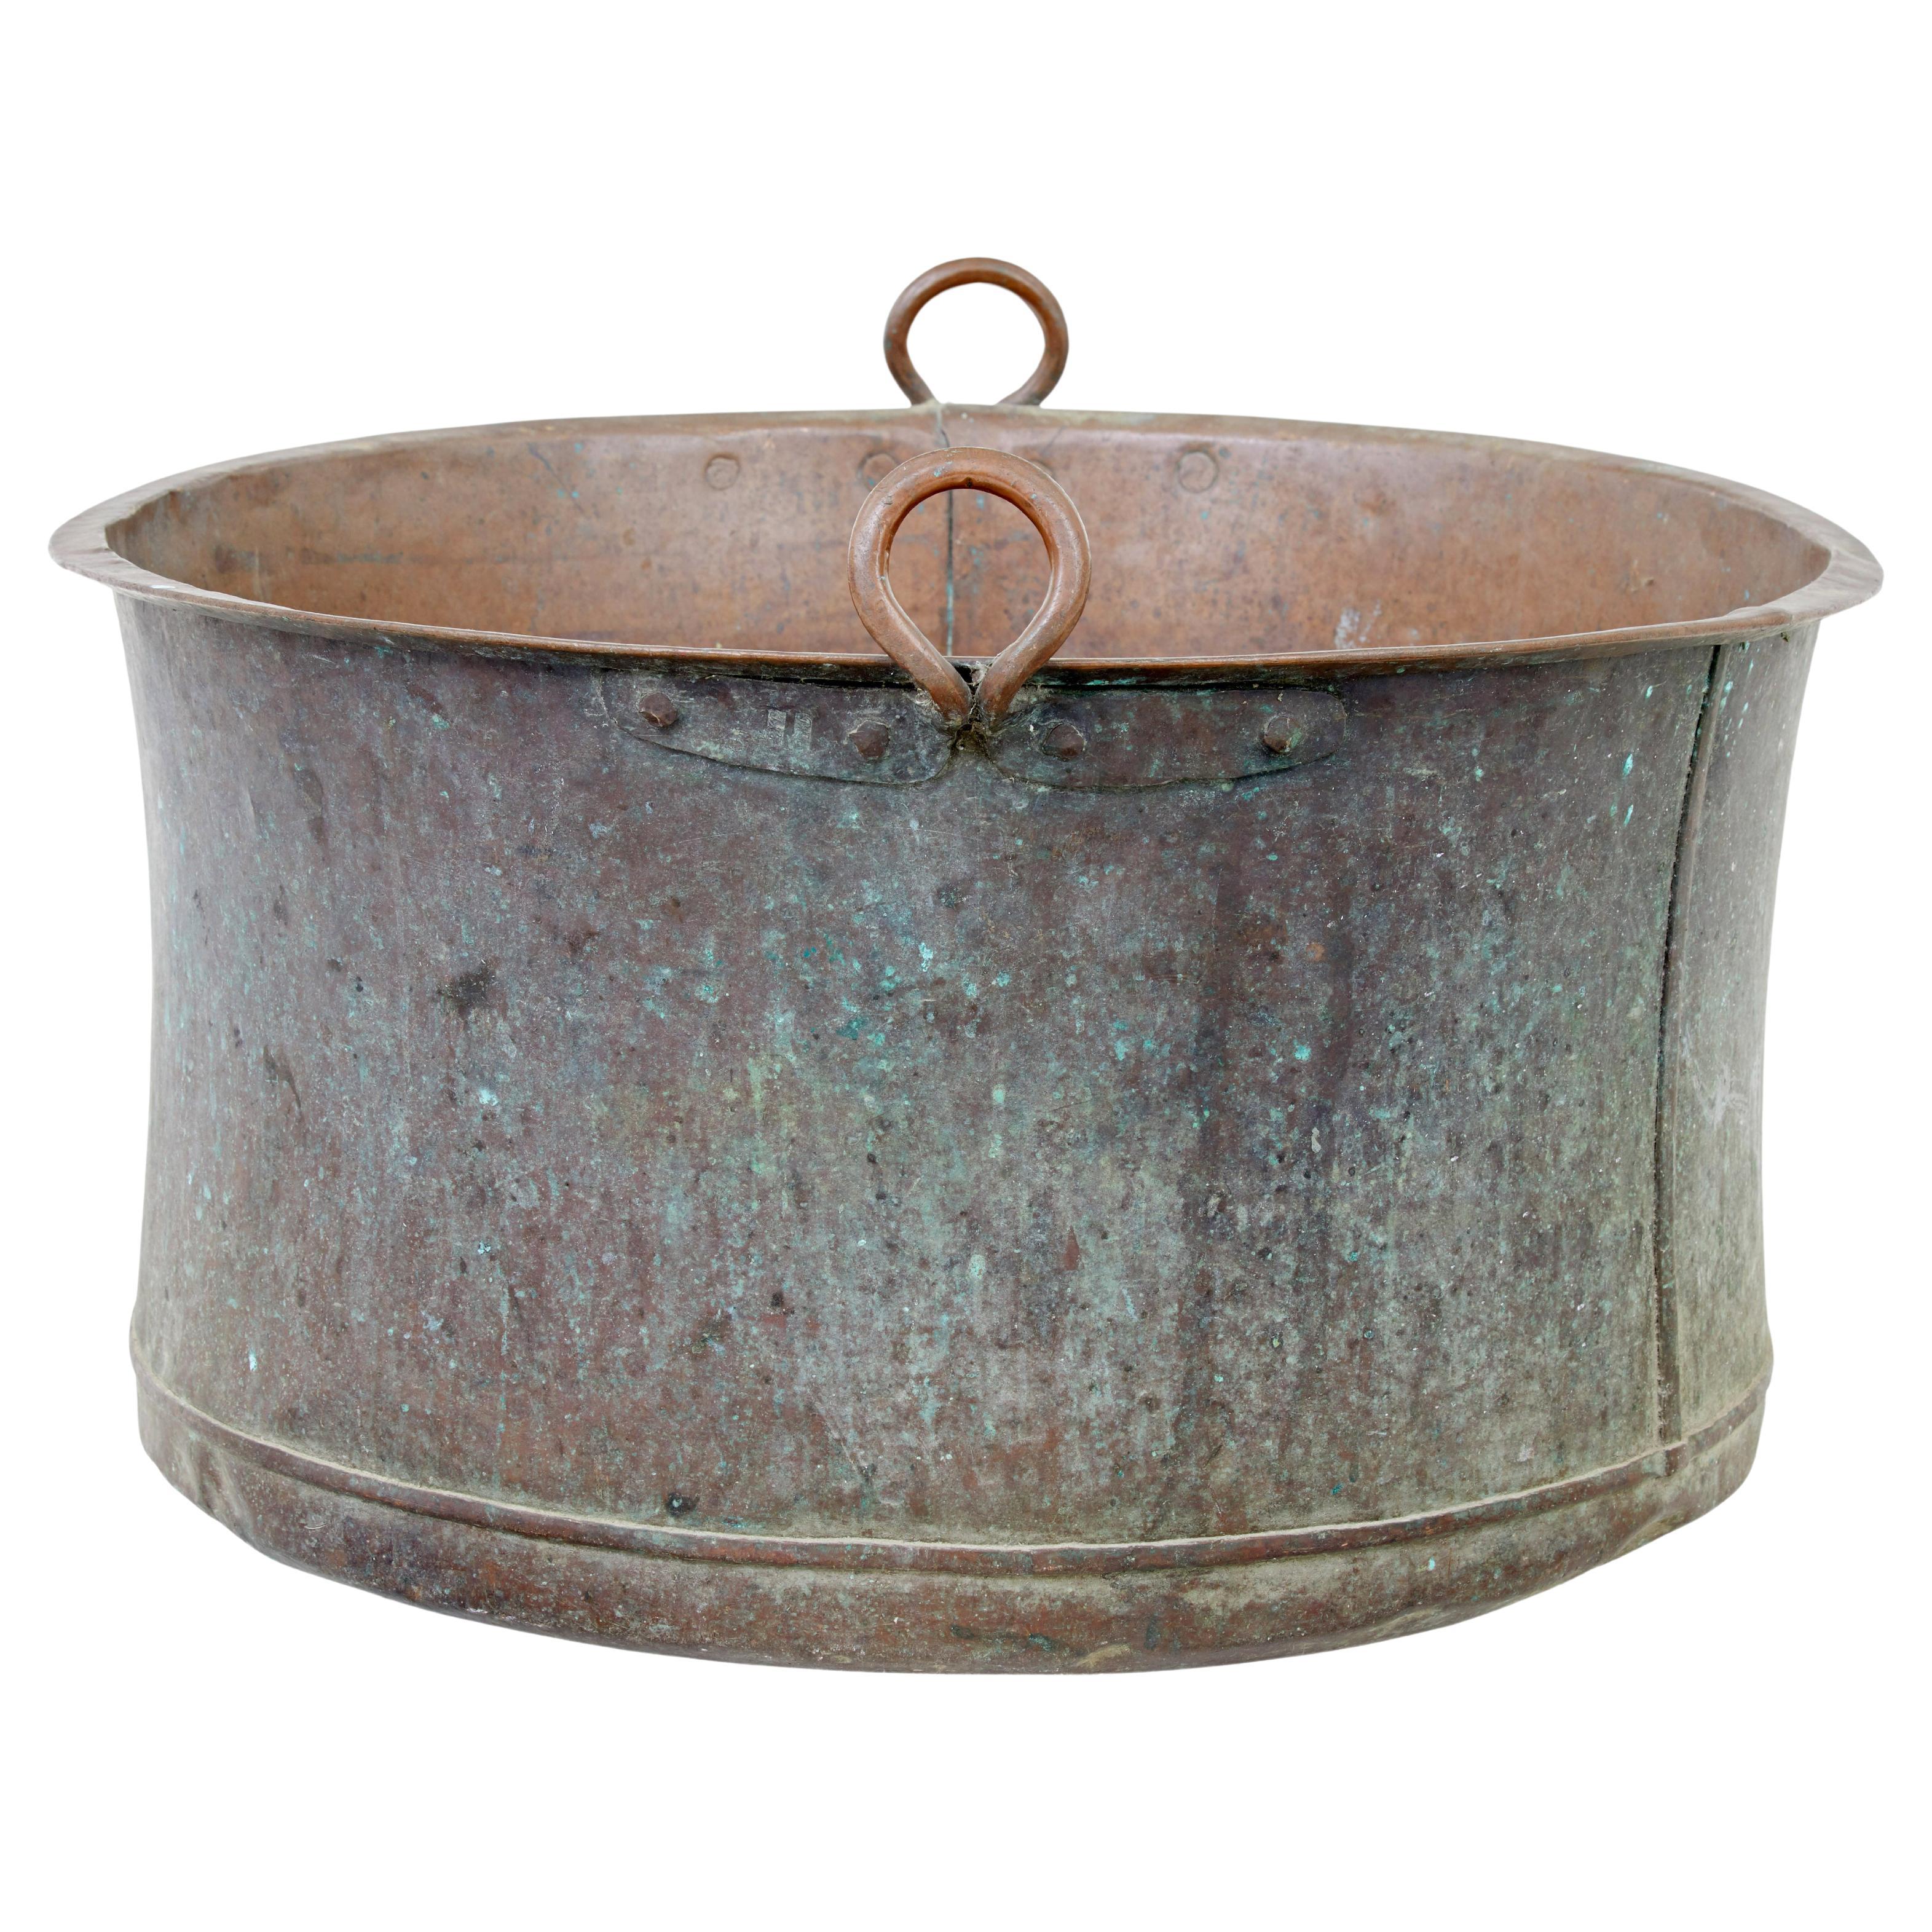 Large 19th century cooking pot with original patina For Sale